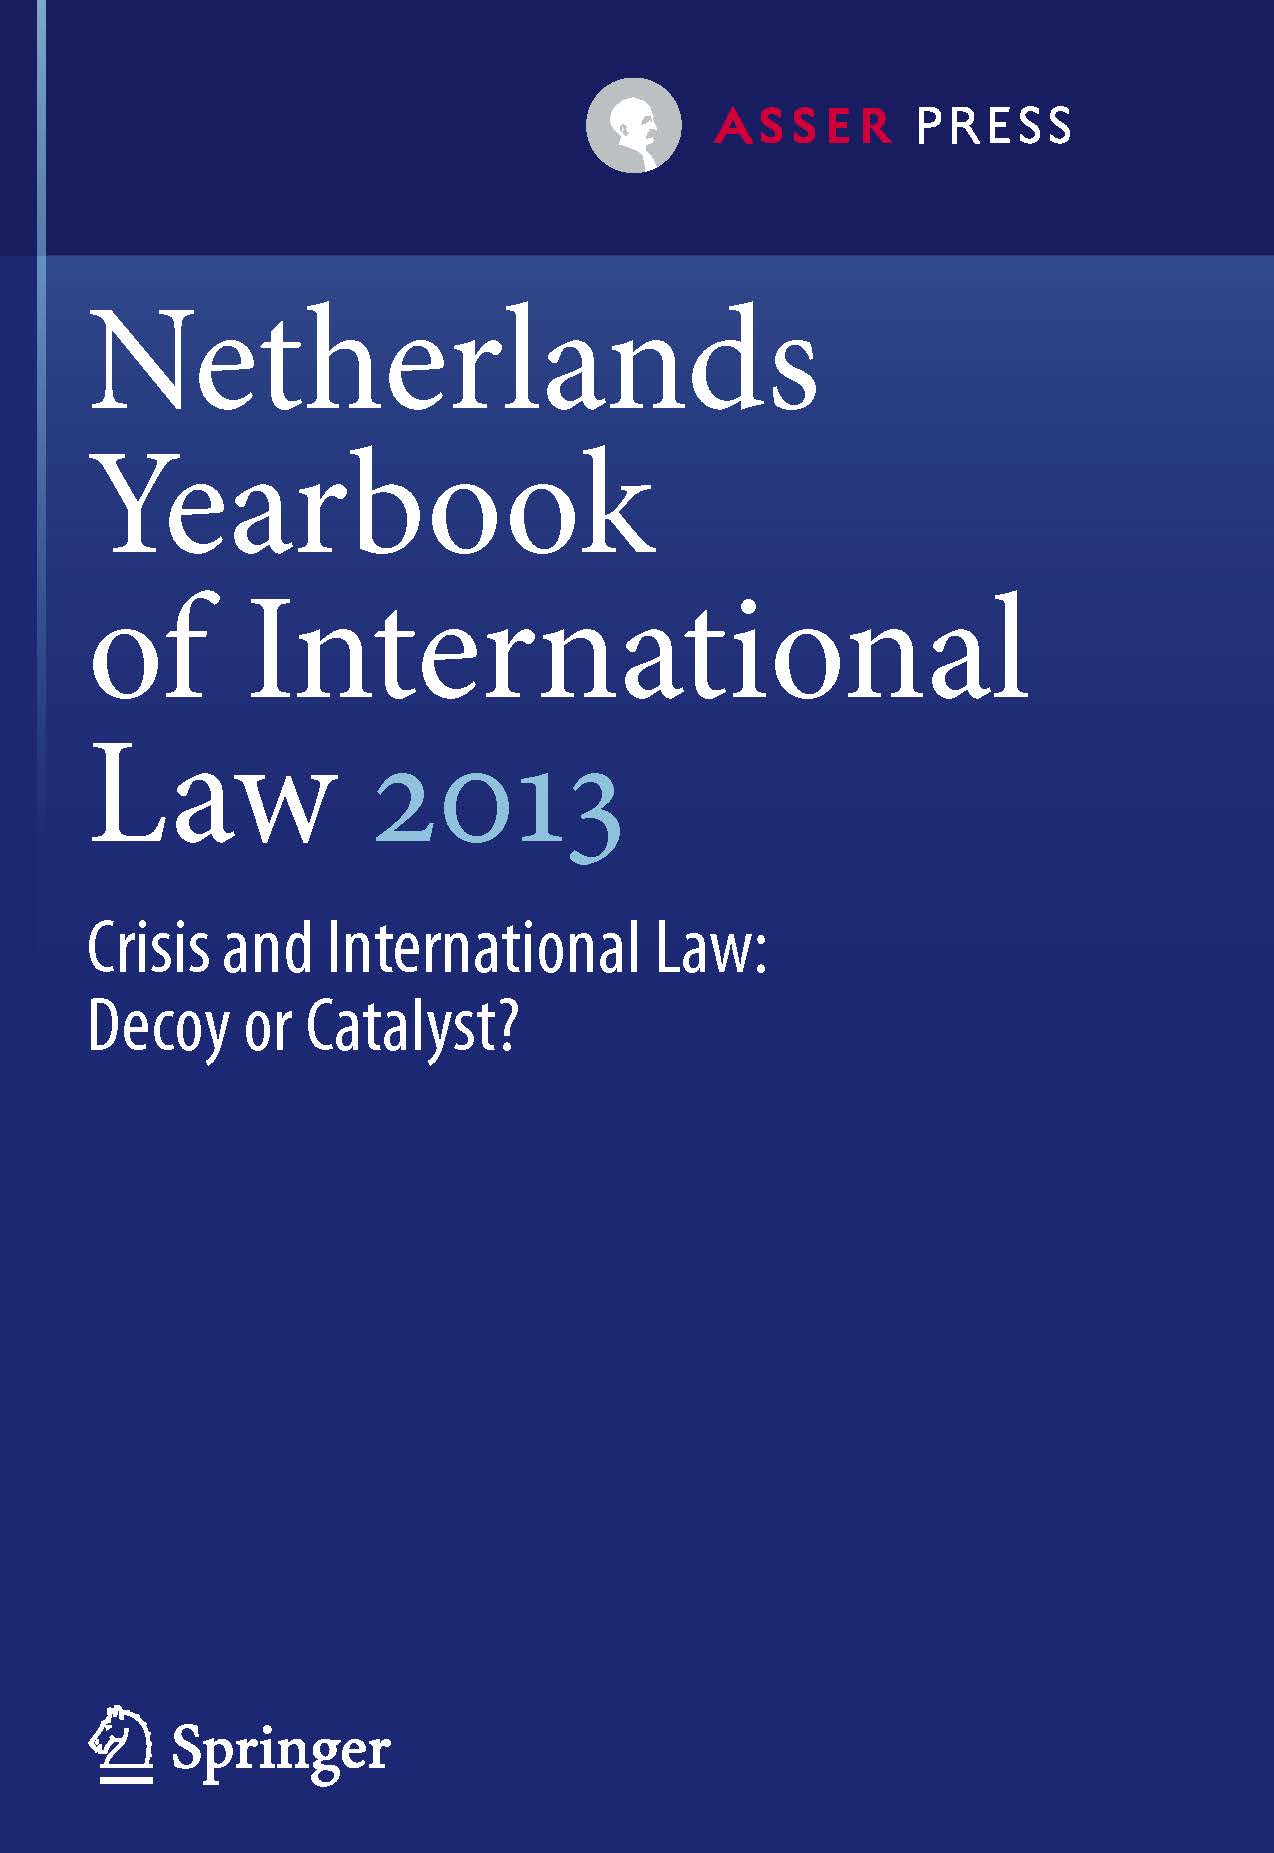 Netherlands Yearbook of International Law 2013, Volume 44 - Crisis and International Law: Decoy or Catalyst?